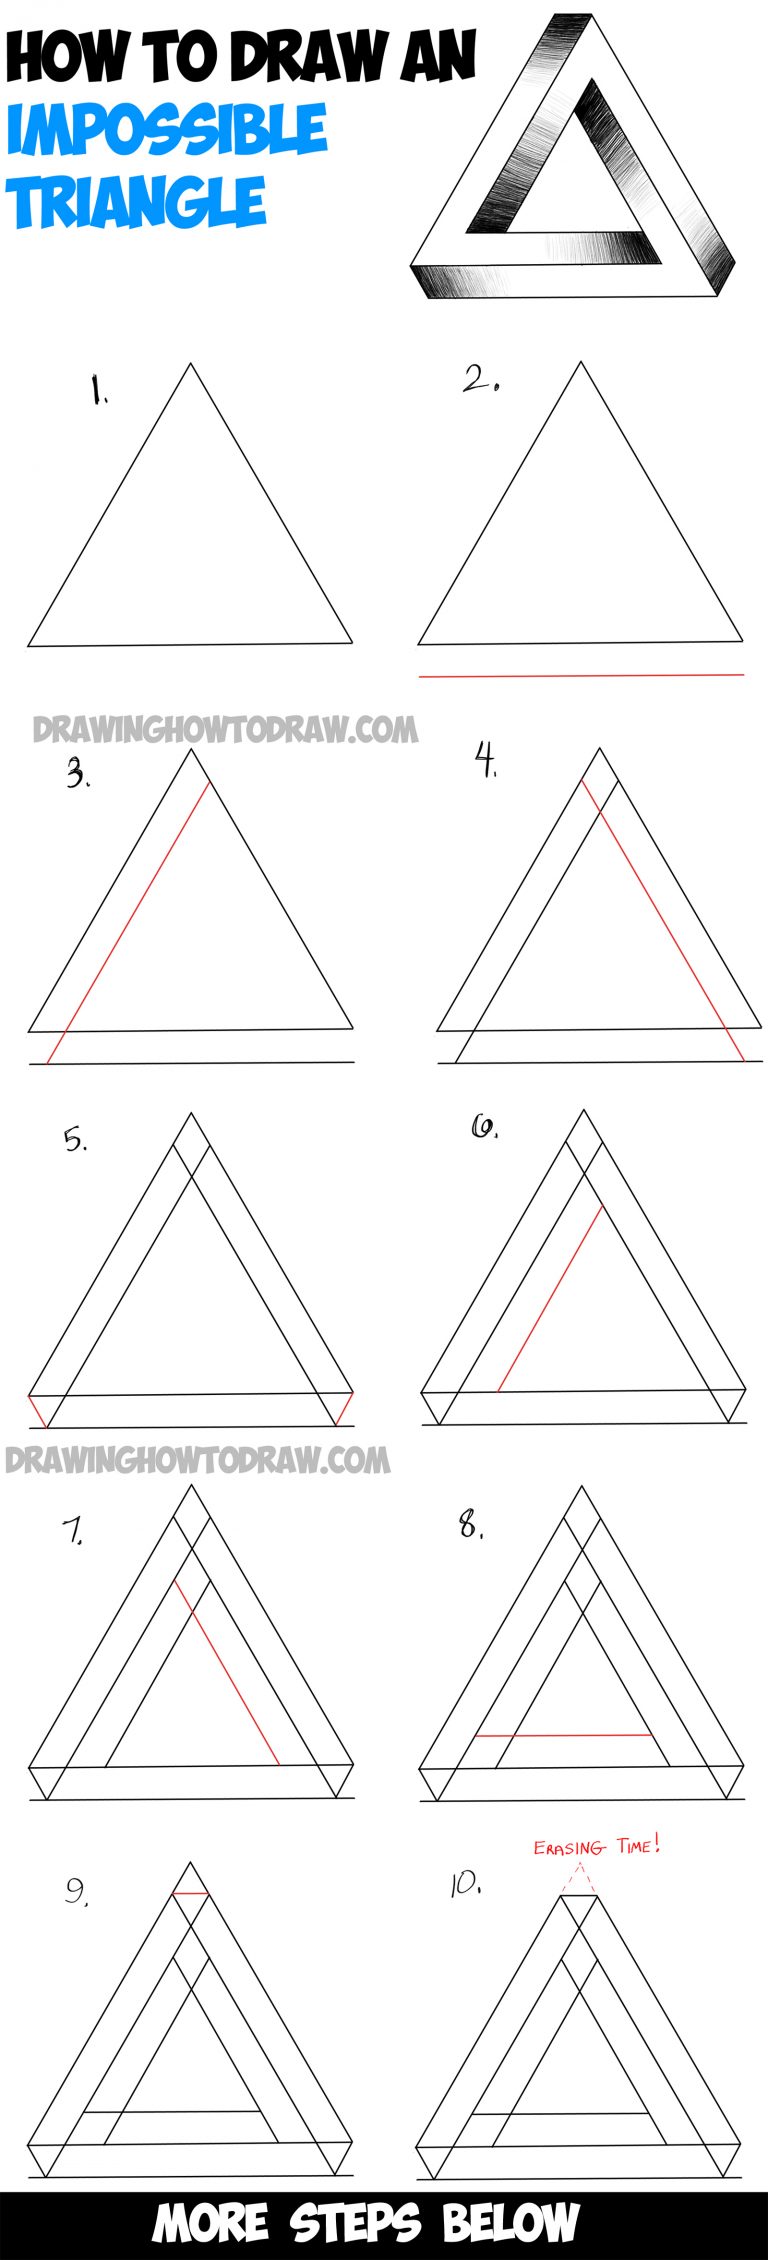 How to Draw an Impossible Triangle